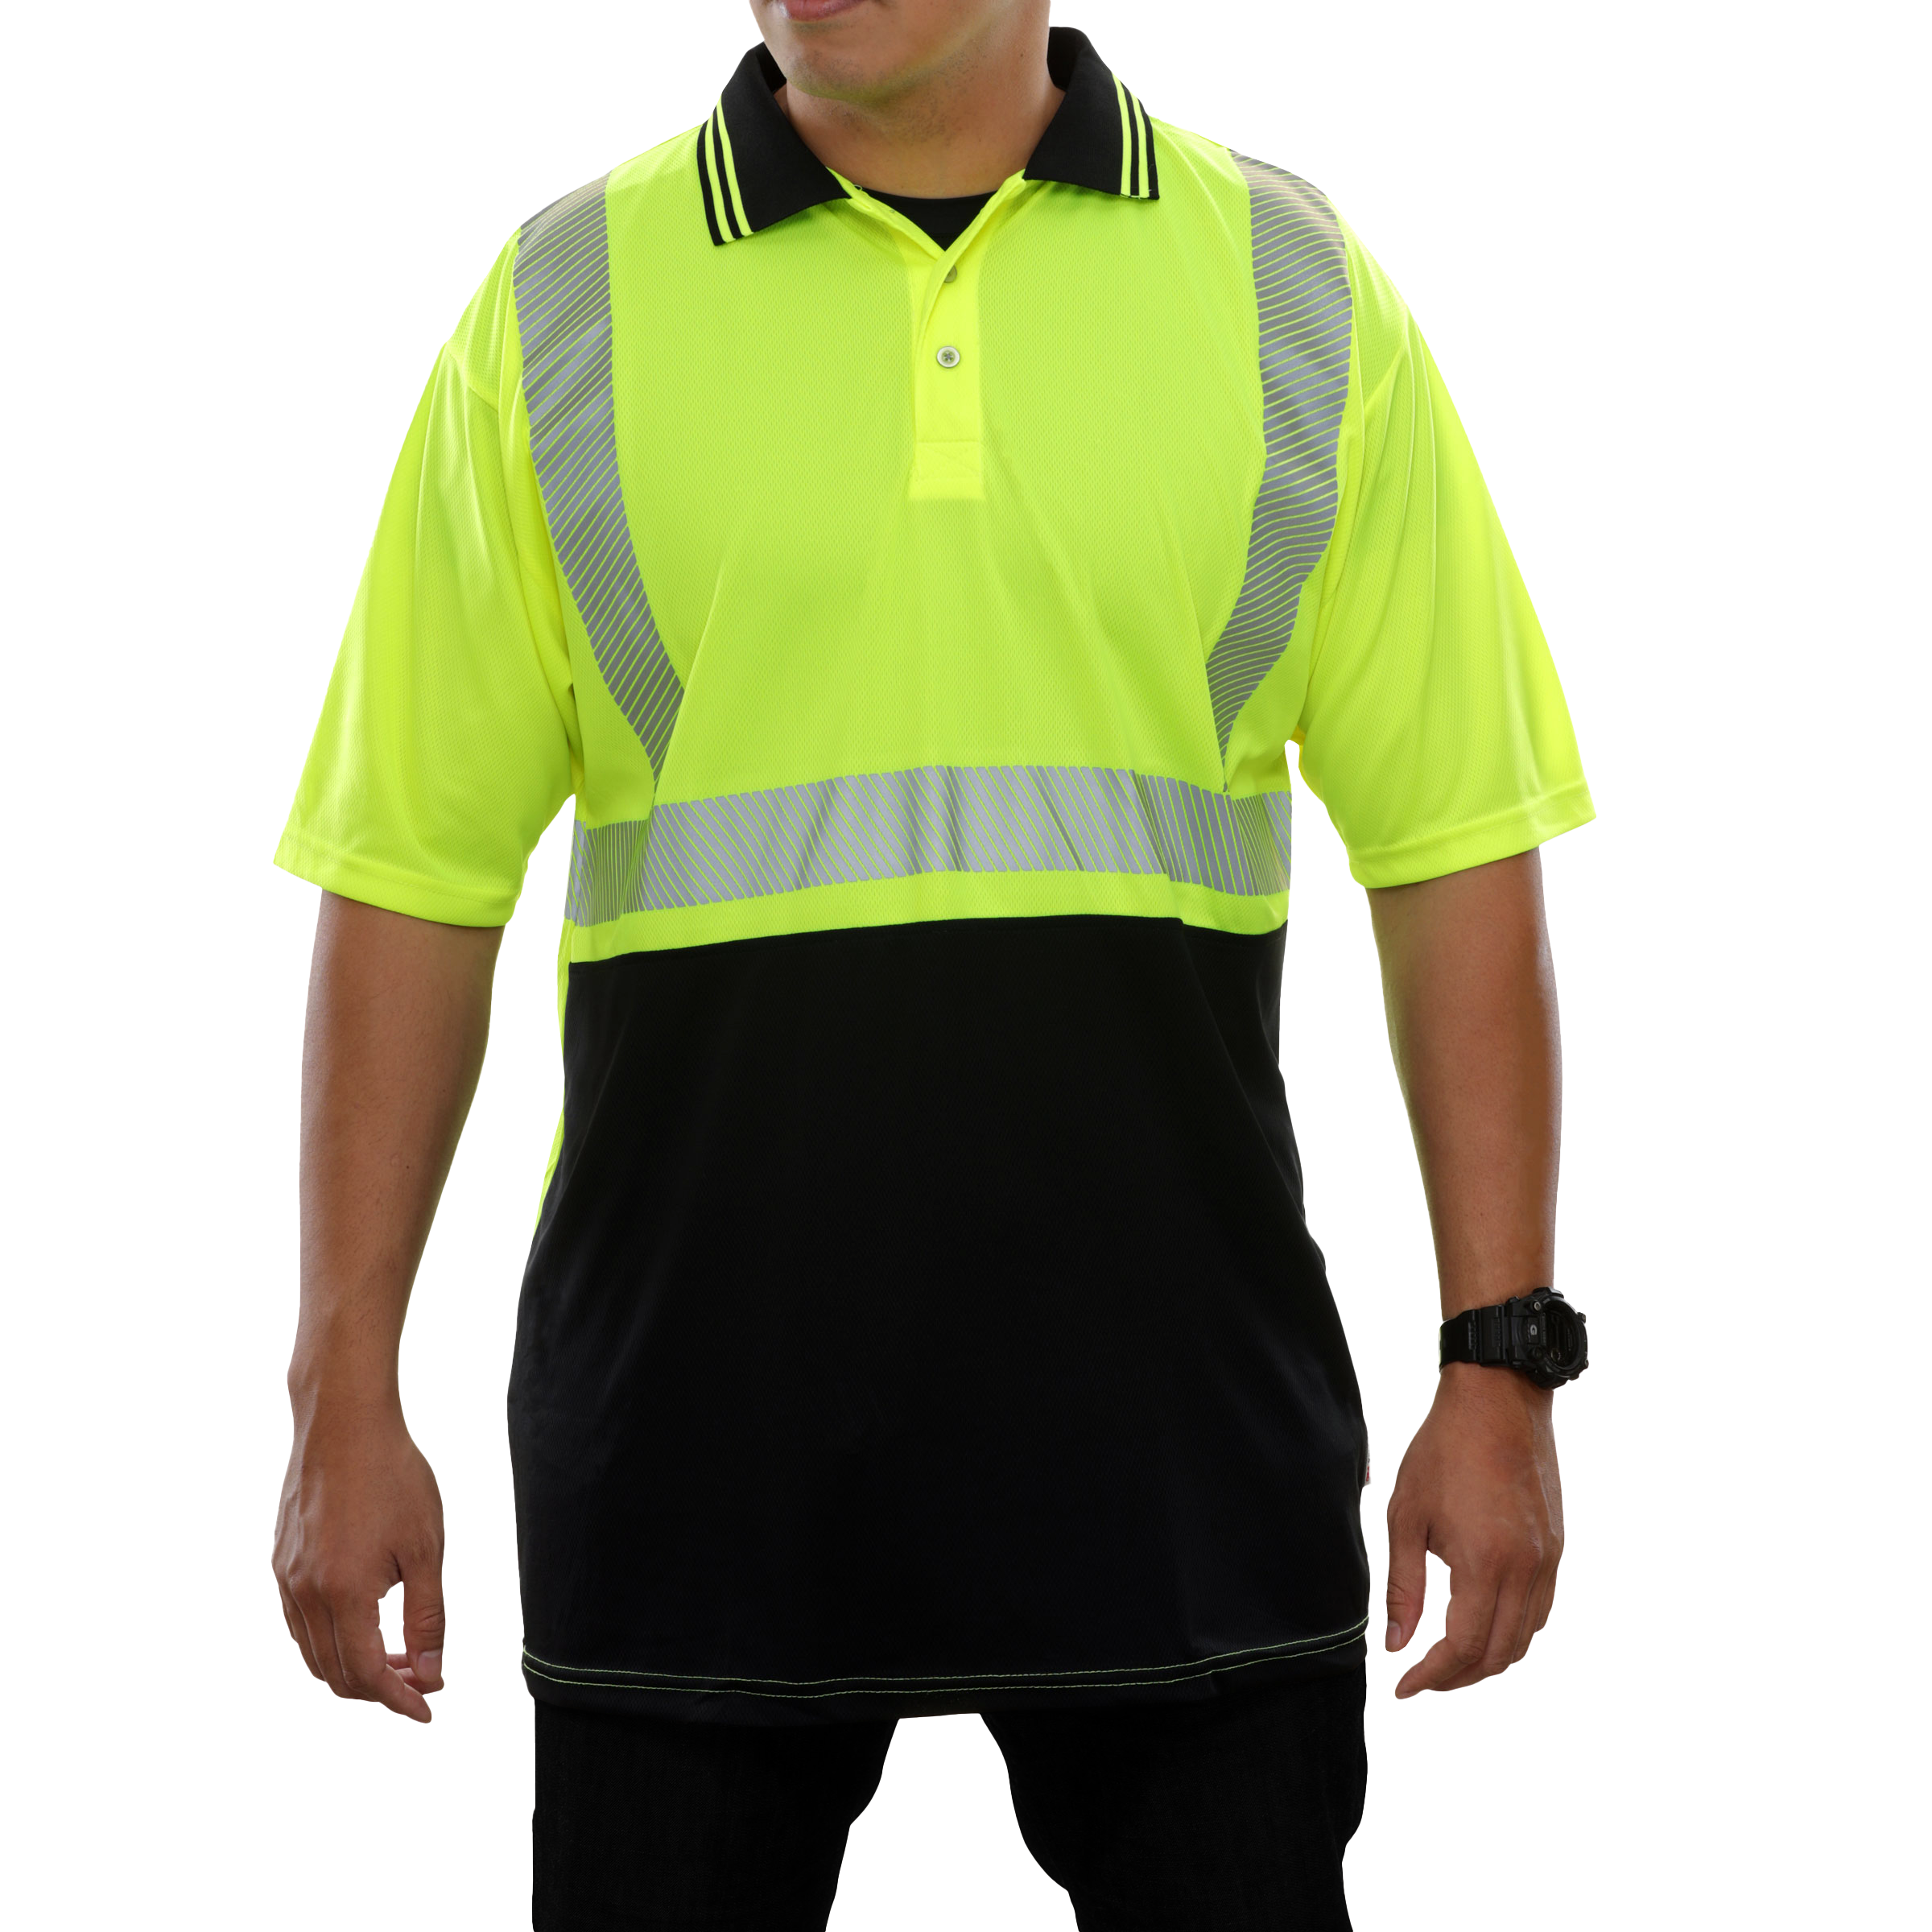 Reflective Apparel High Visibility Polo Shirt Two-Tone Birdseye Comfort Trim by 3M